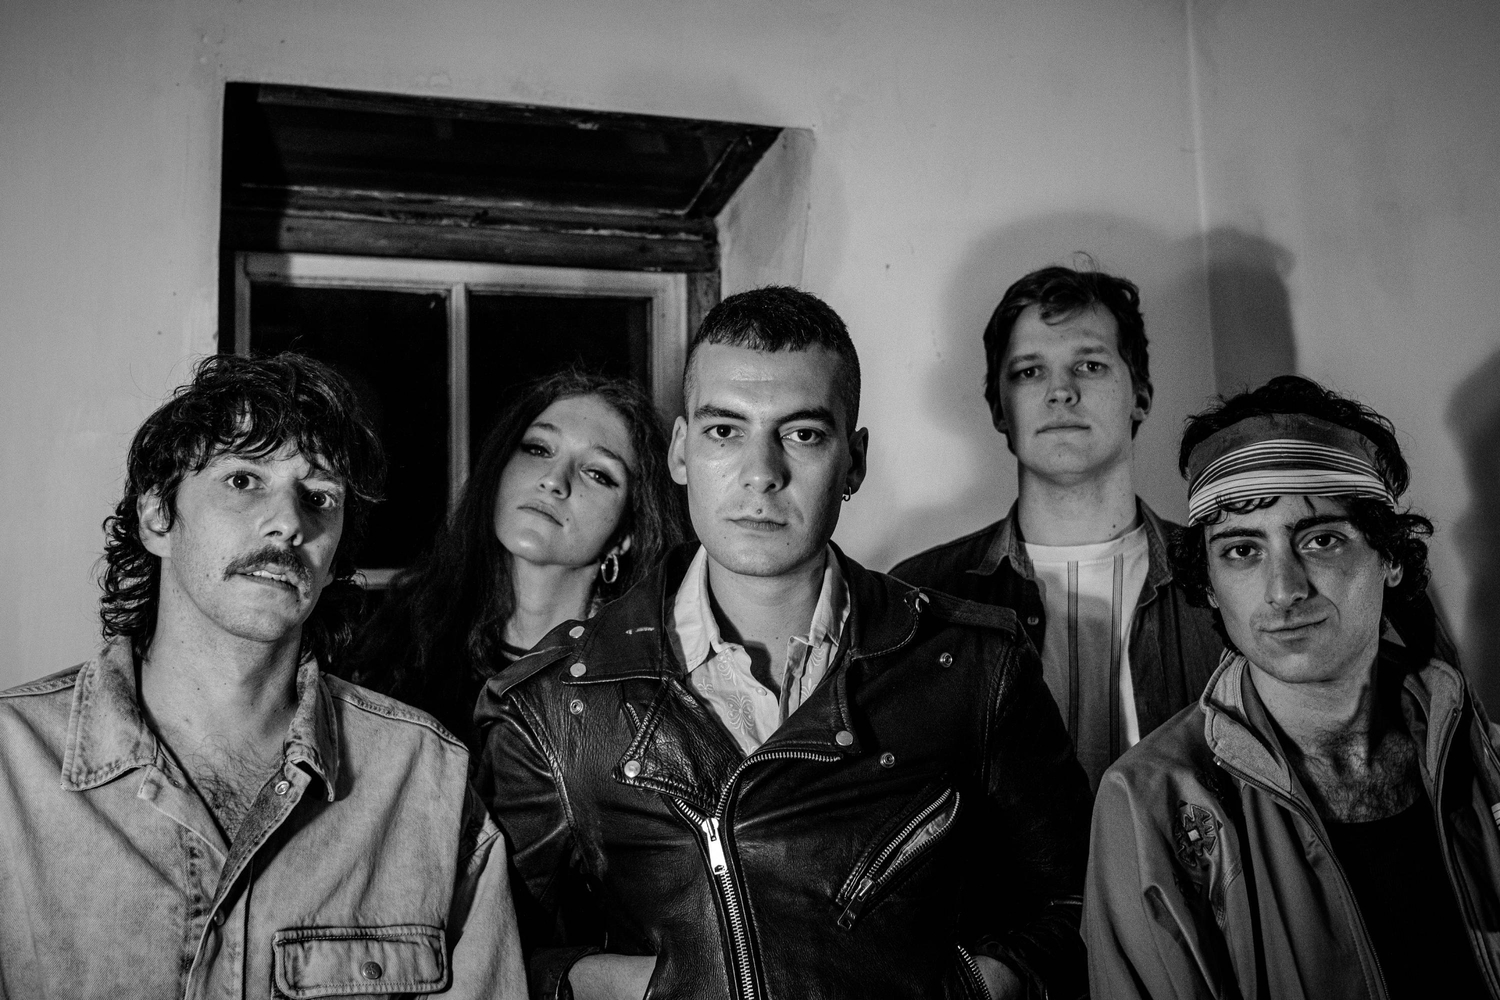 Get To Know… The Gulps